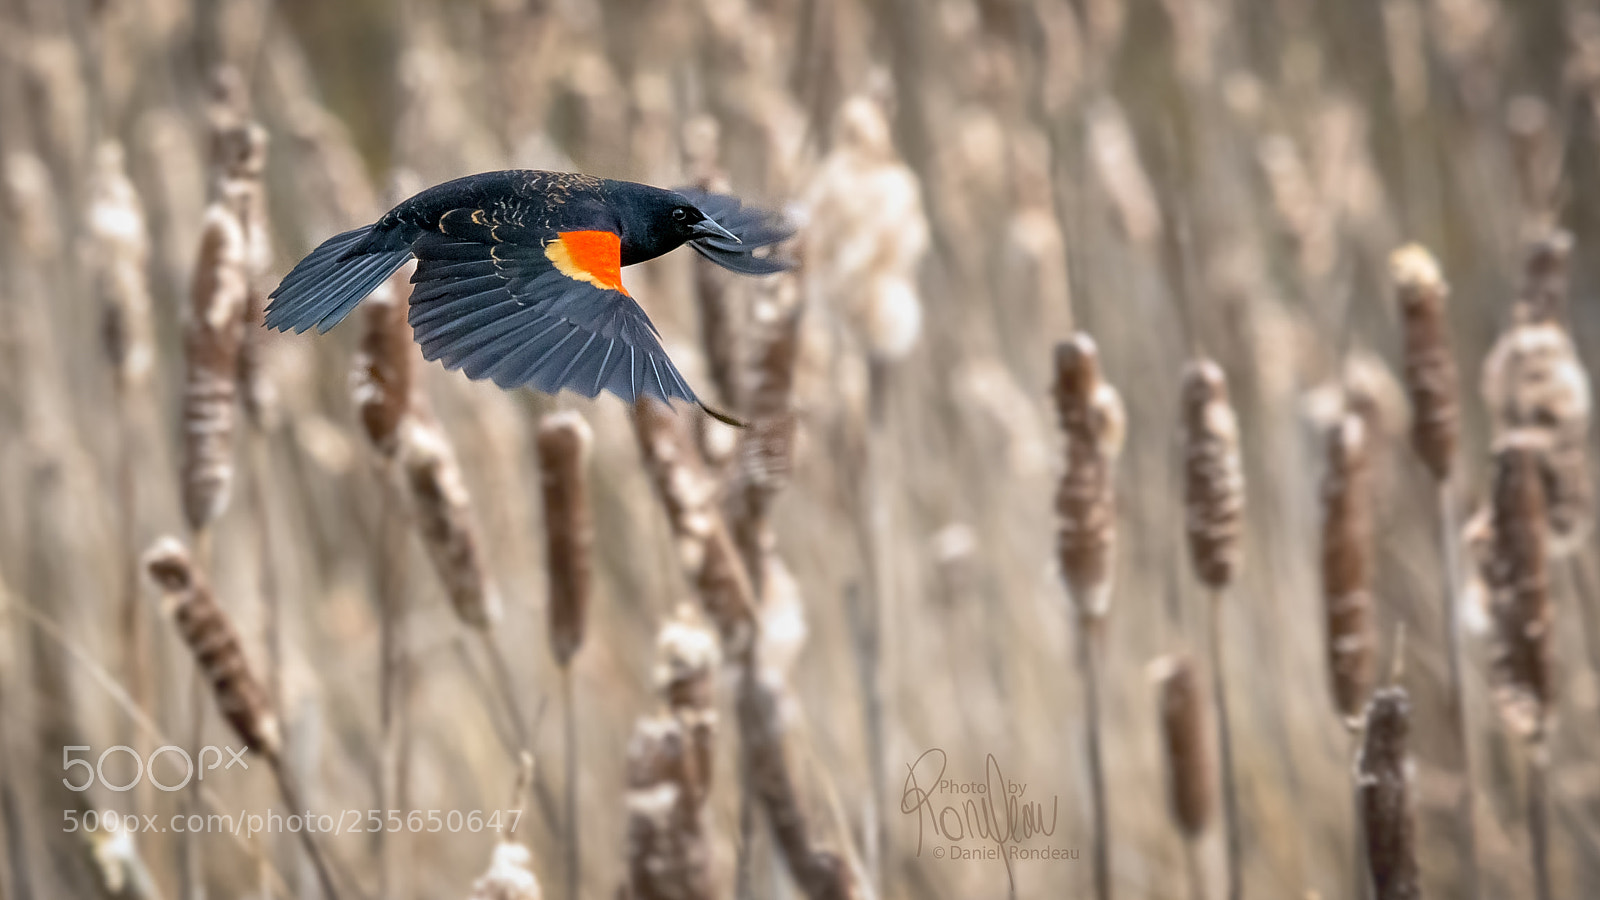 Nikon D7200 sample photo. Red-wing black bird in photography